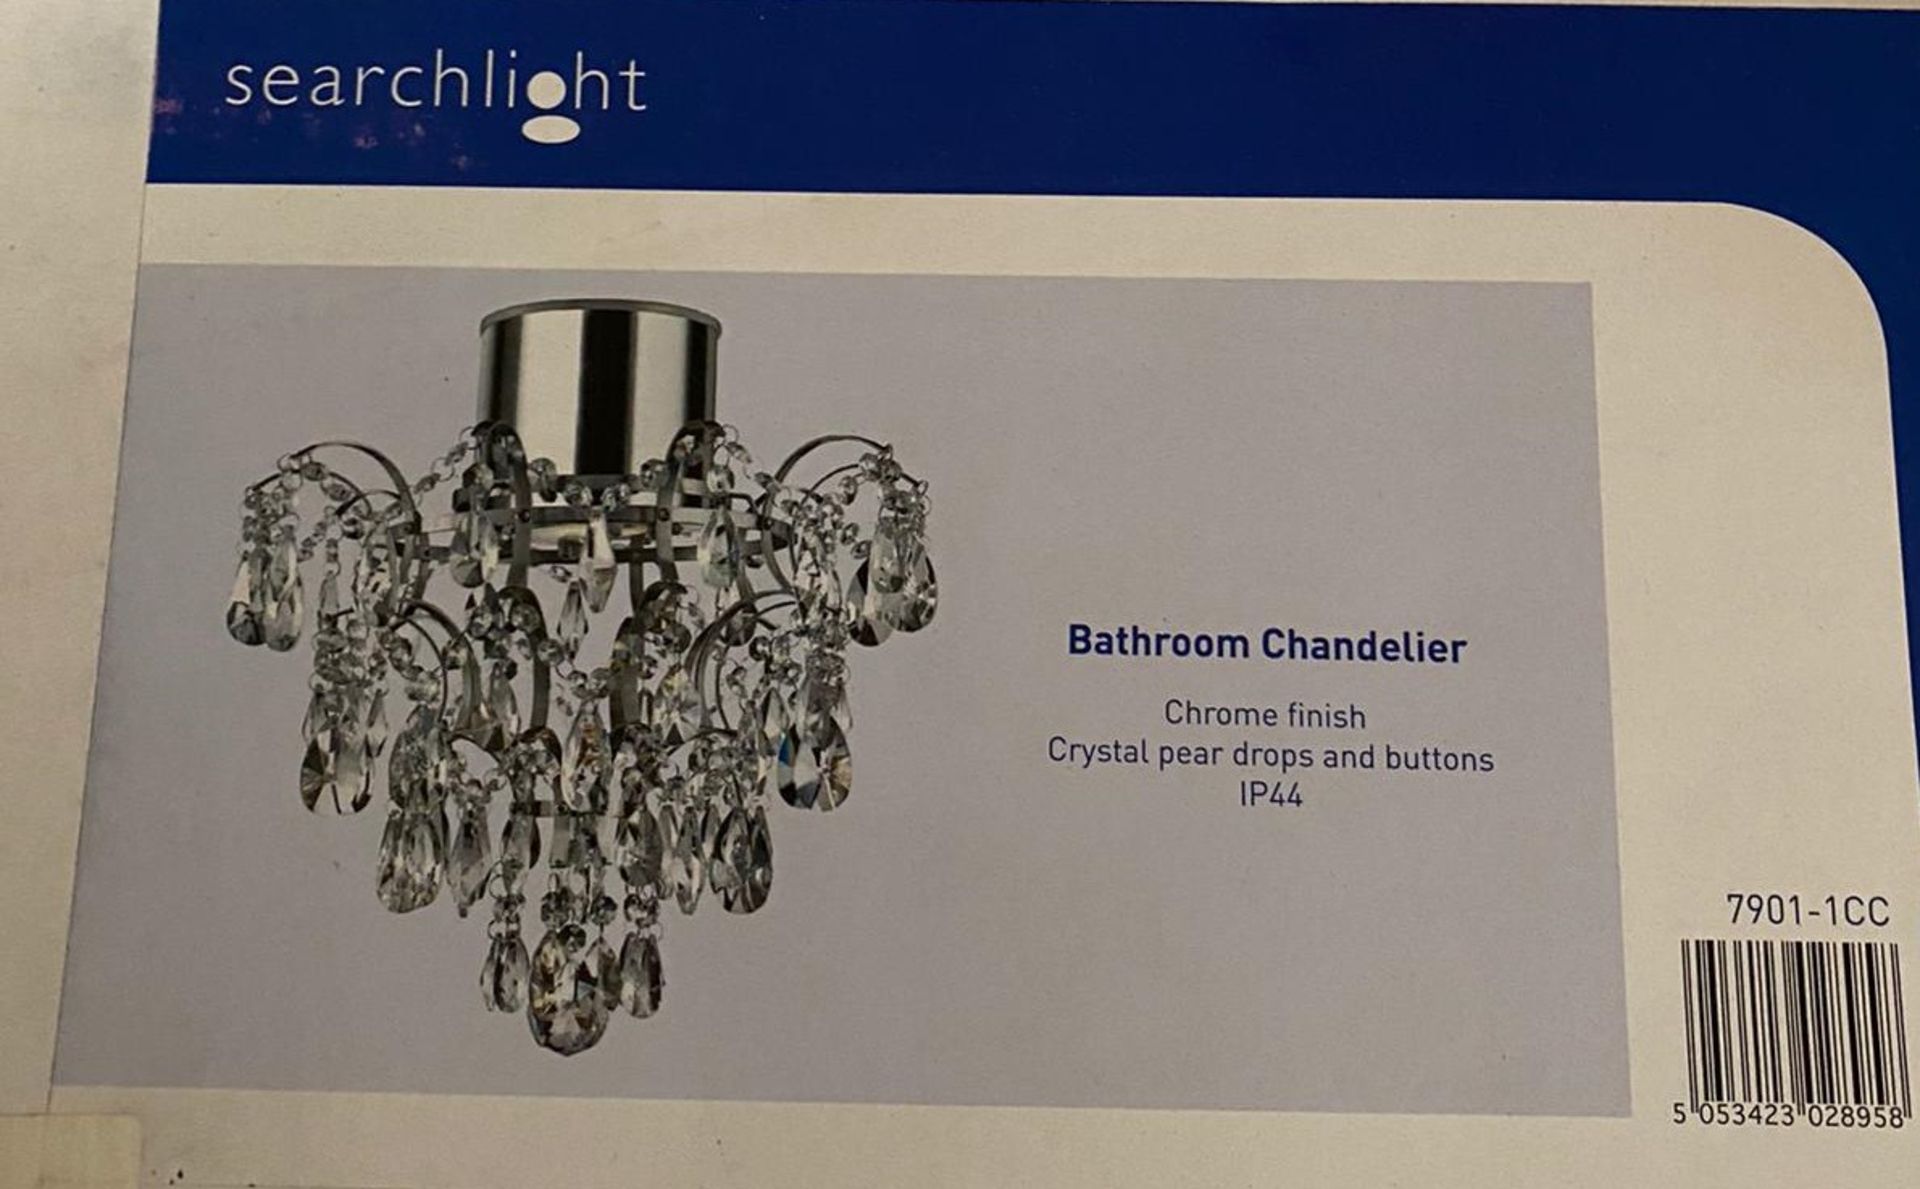 1 x Searchlight Bathroom Chandelier in chrome - Ref: 7901-1CC - New and Boxed - RRP: £200.00